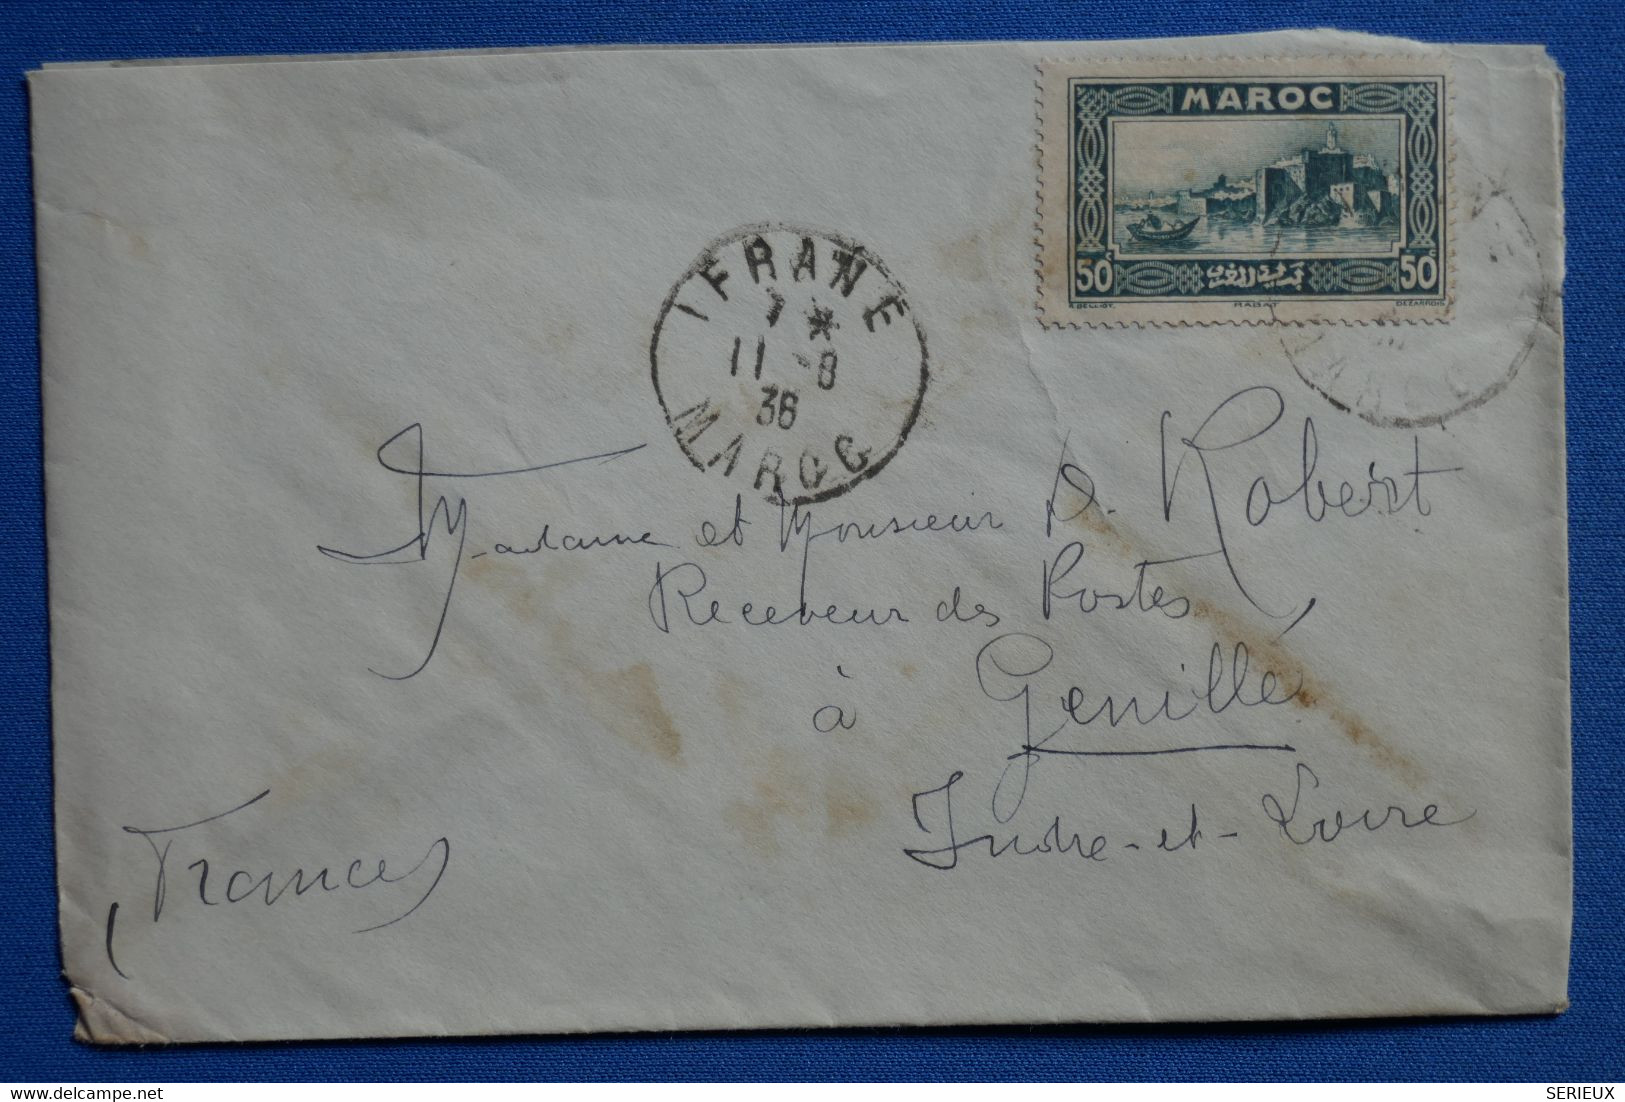 G19 MAROC  BELLE LETTRE 1936 IFRAN POUR GENILLEFRANCE + AFFRANCH INTERESSANT - Covers & Documents